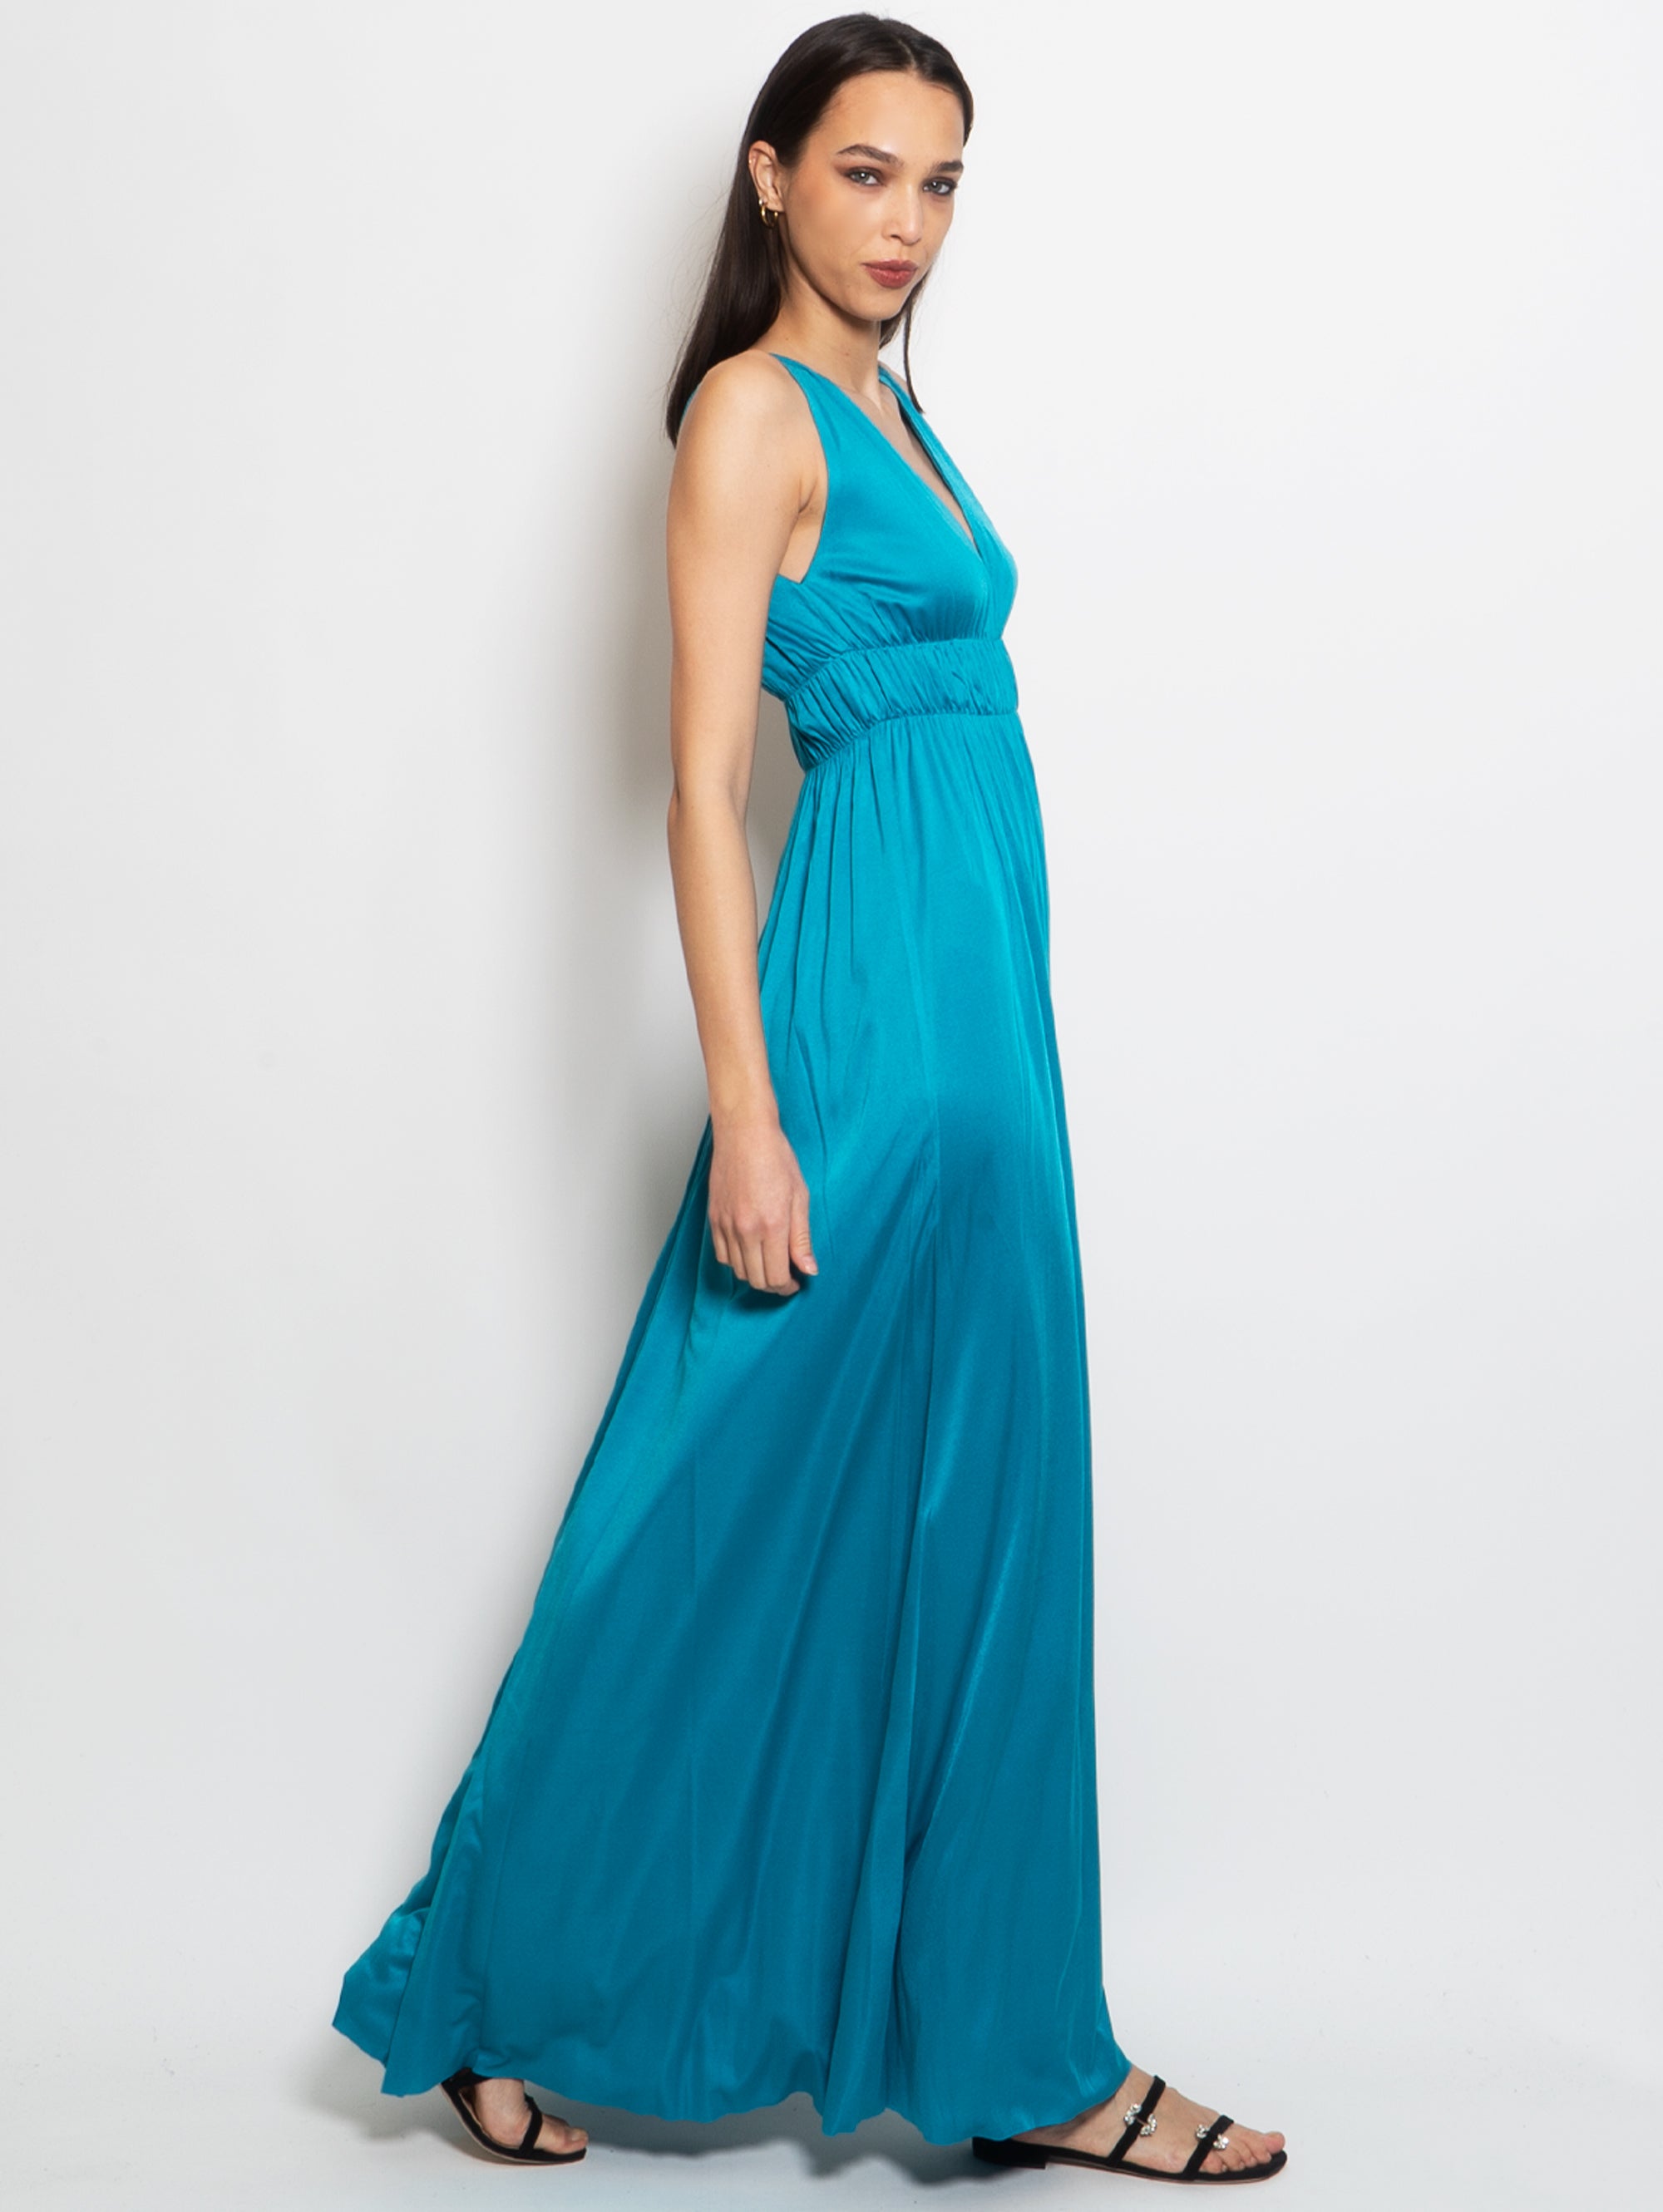 Turquoise Empire Style Long Dress